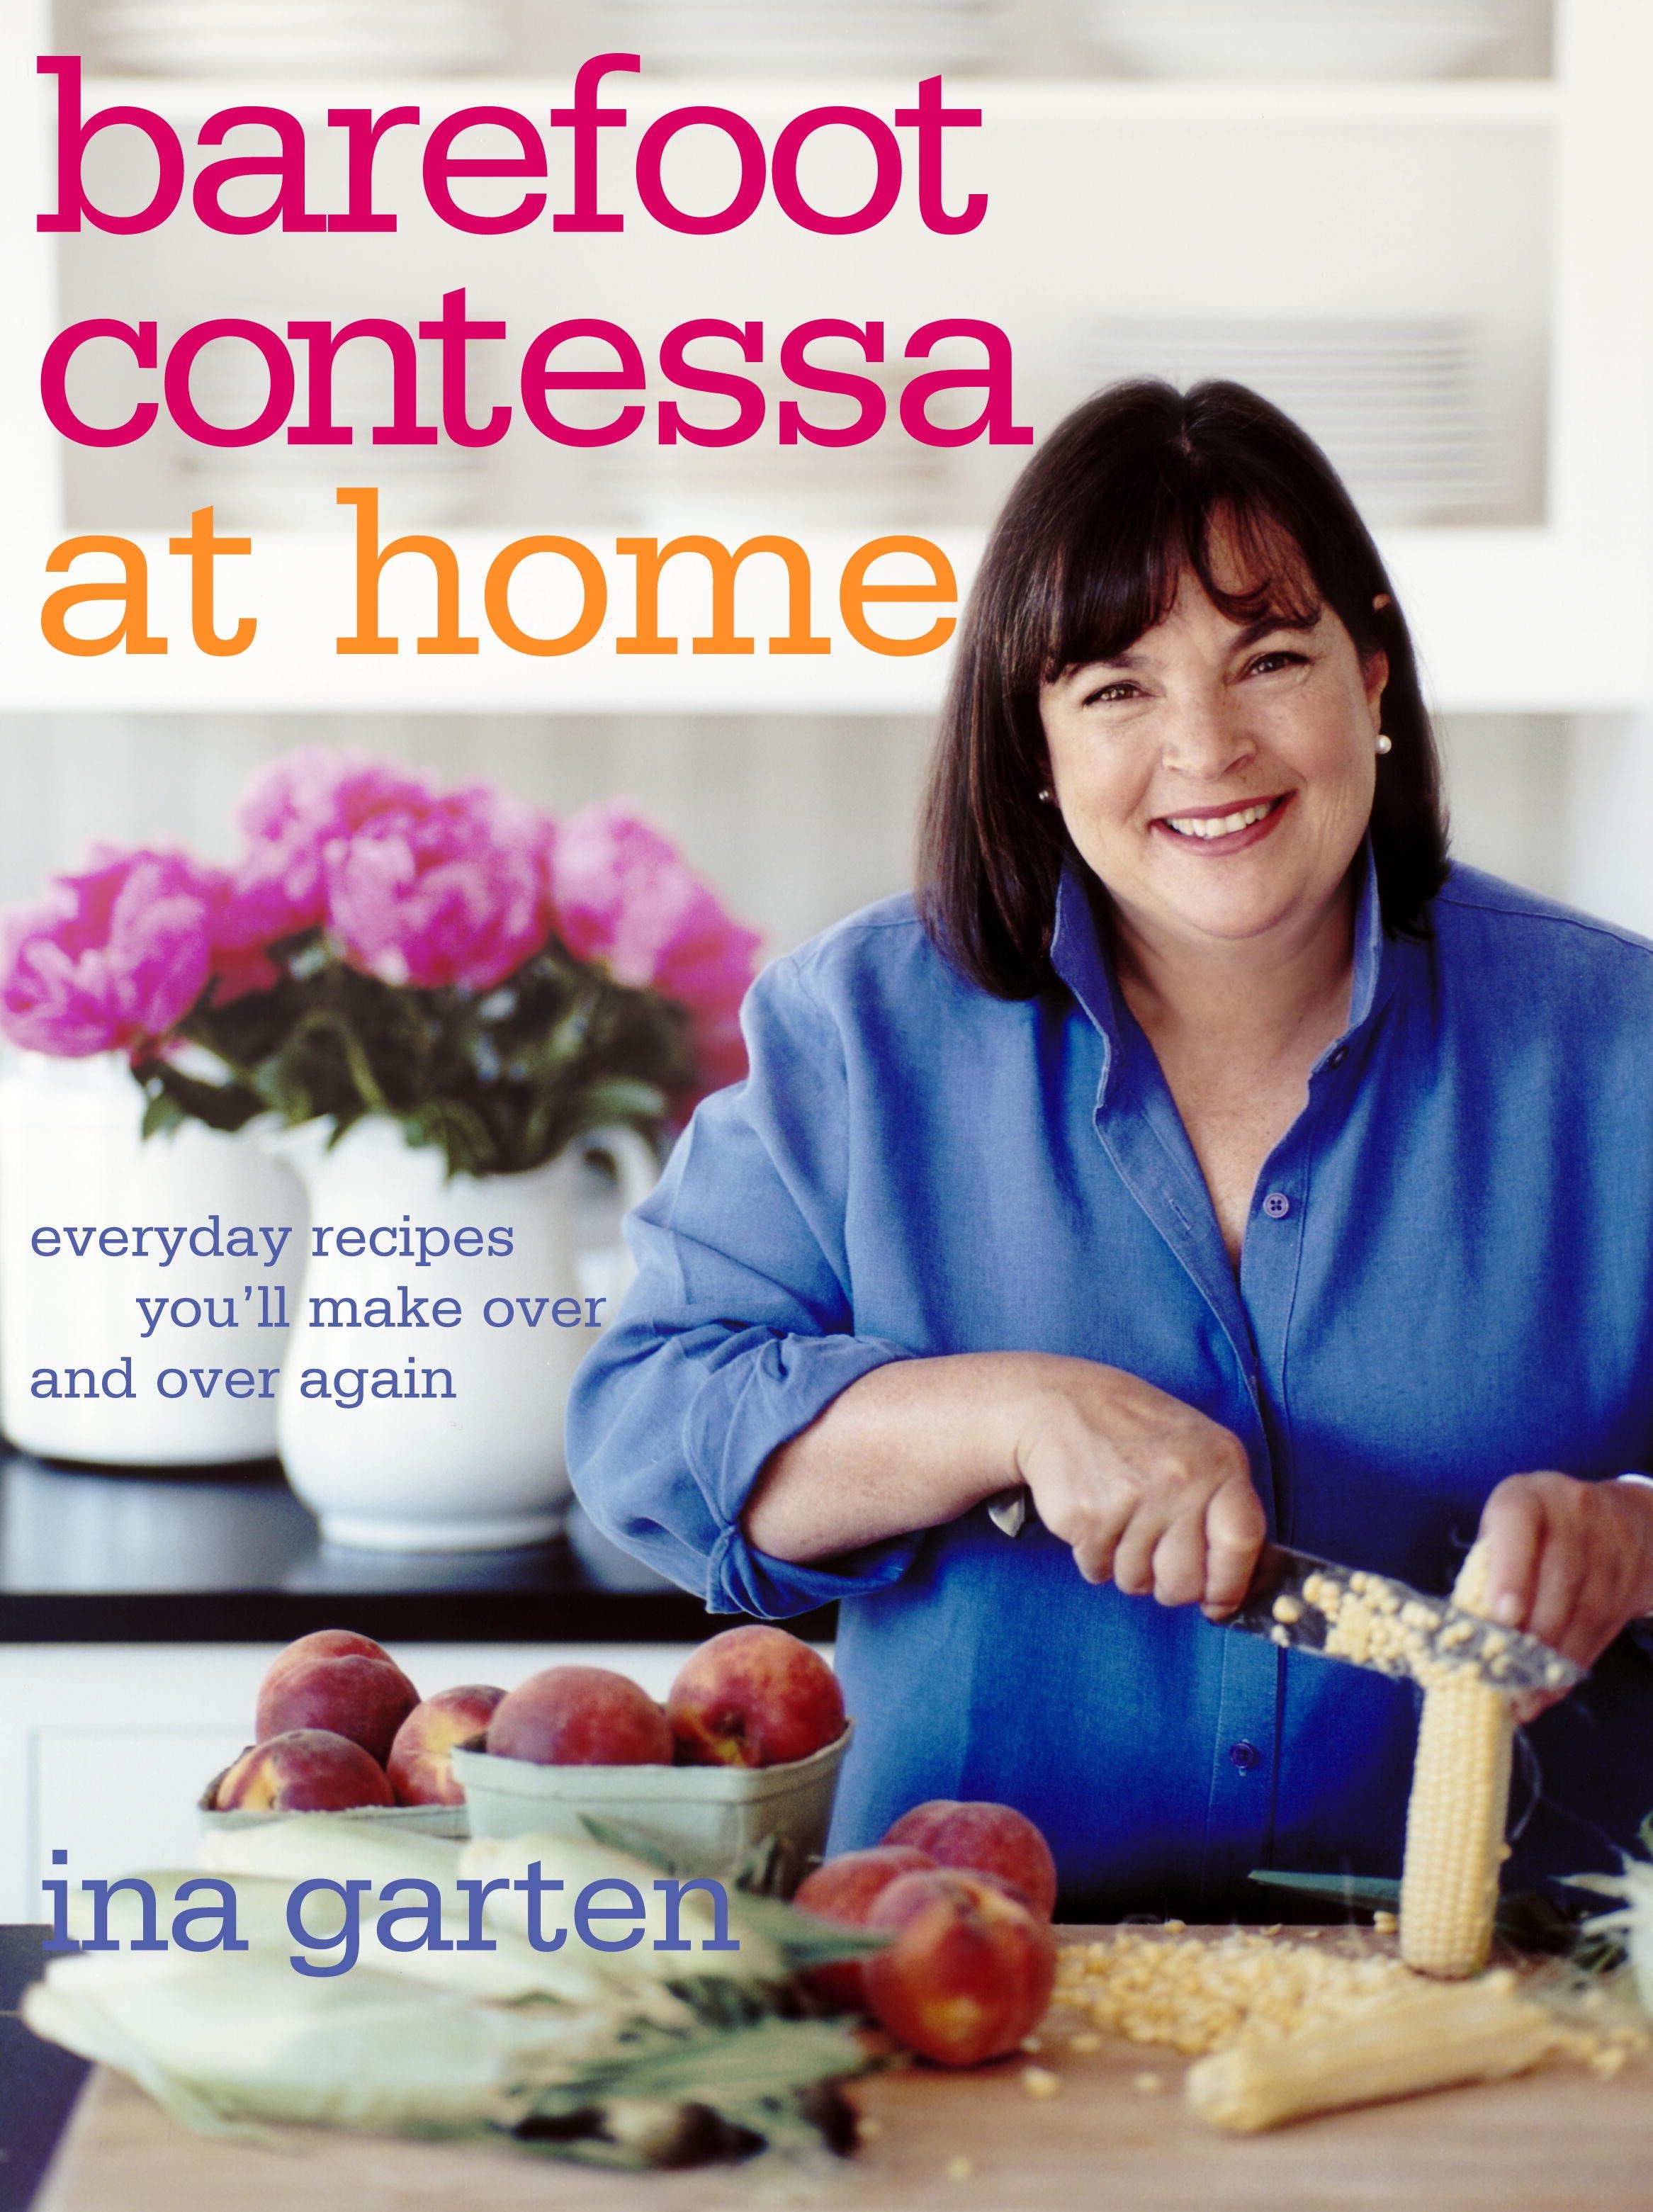 Barefoot Contessa at home everyday recipes you'll make over and over again cover image